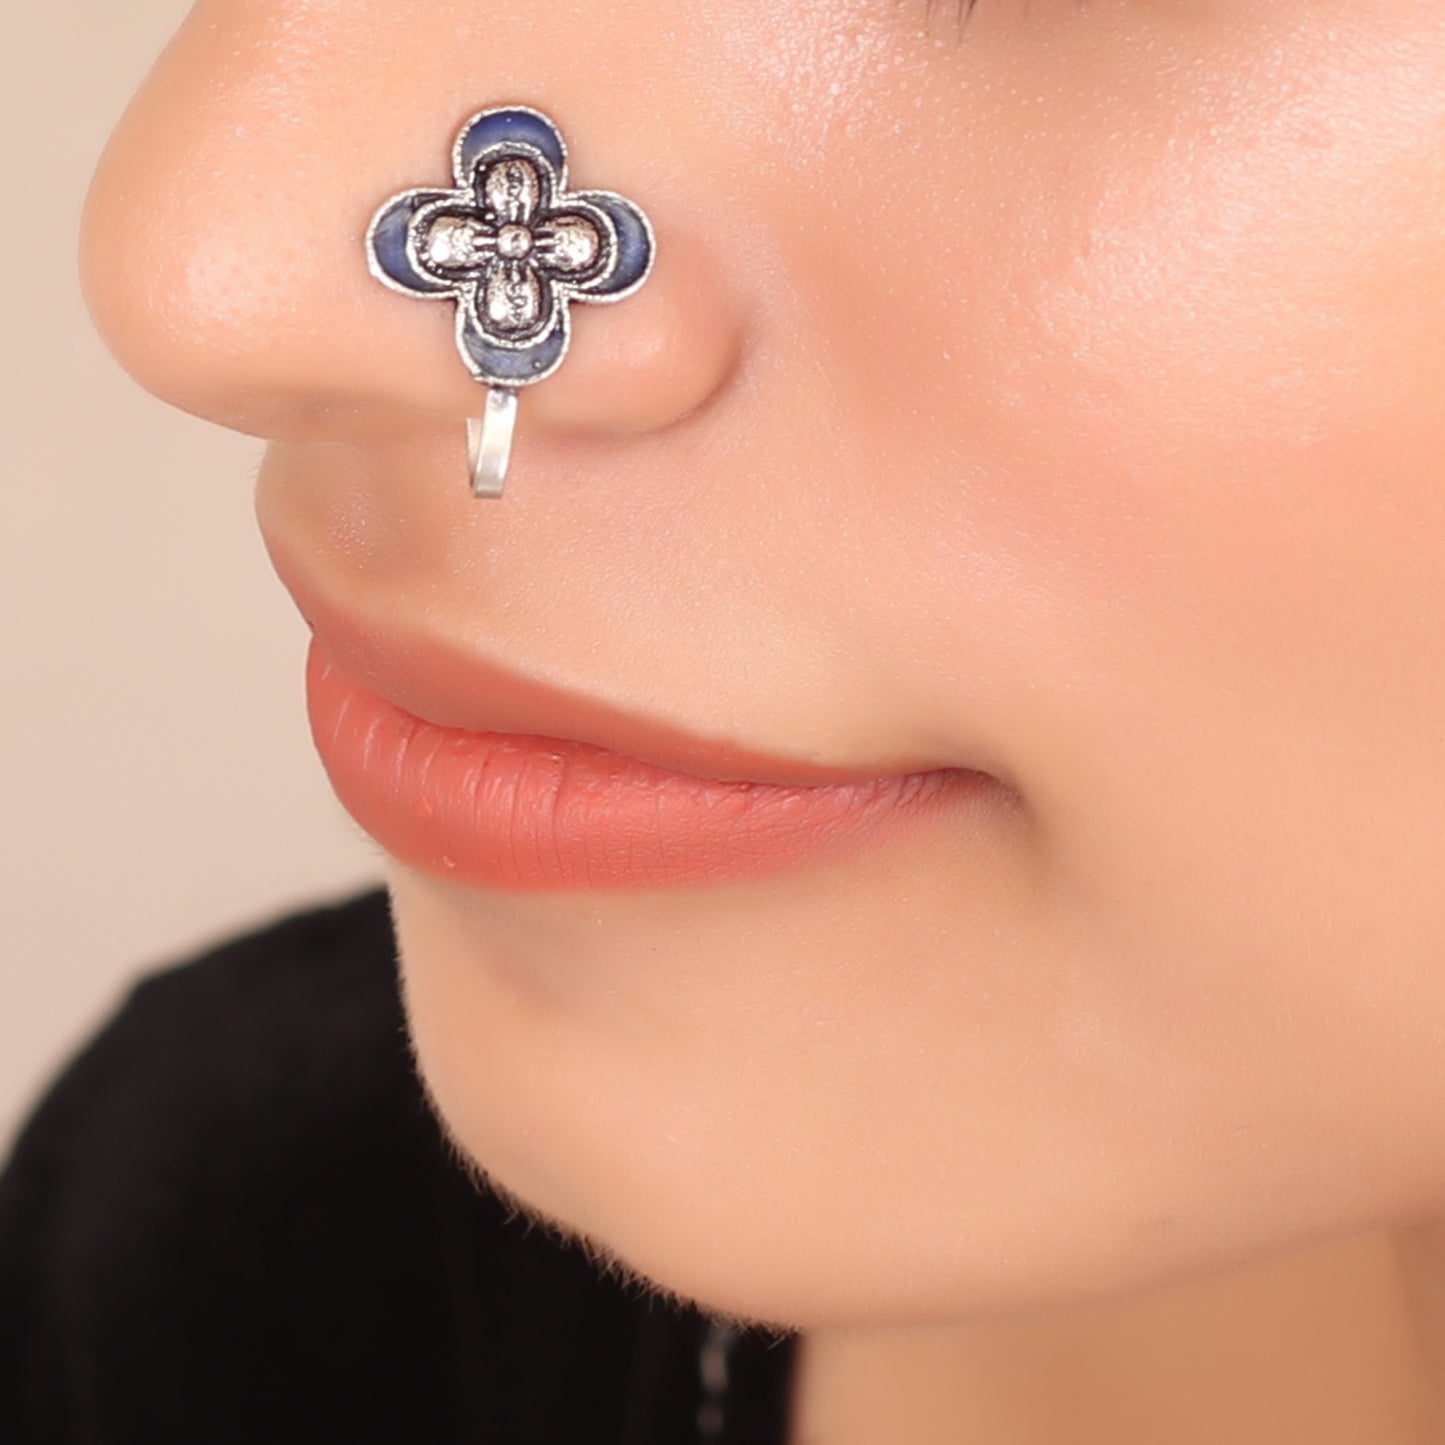 The Butterfly Nose Pin in Dark Blue